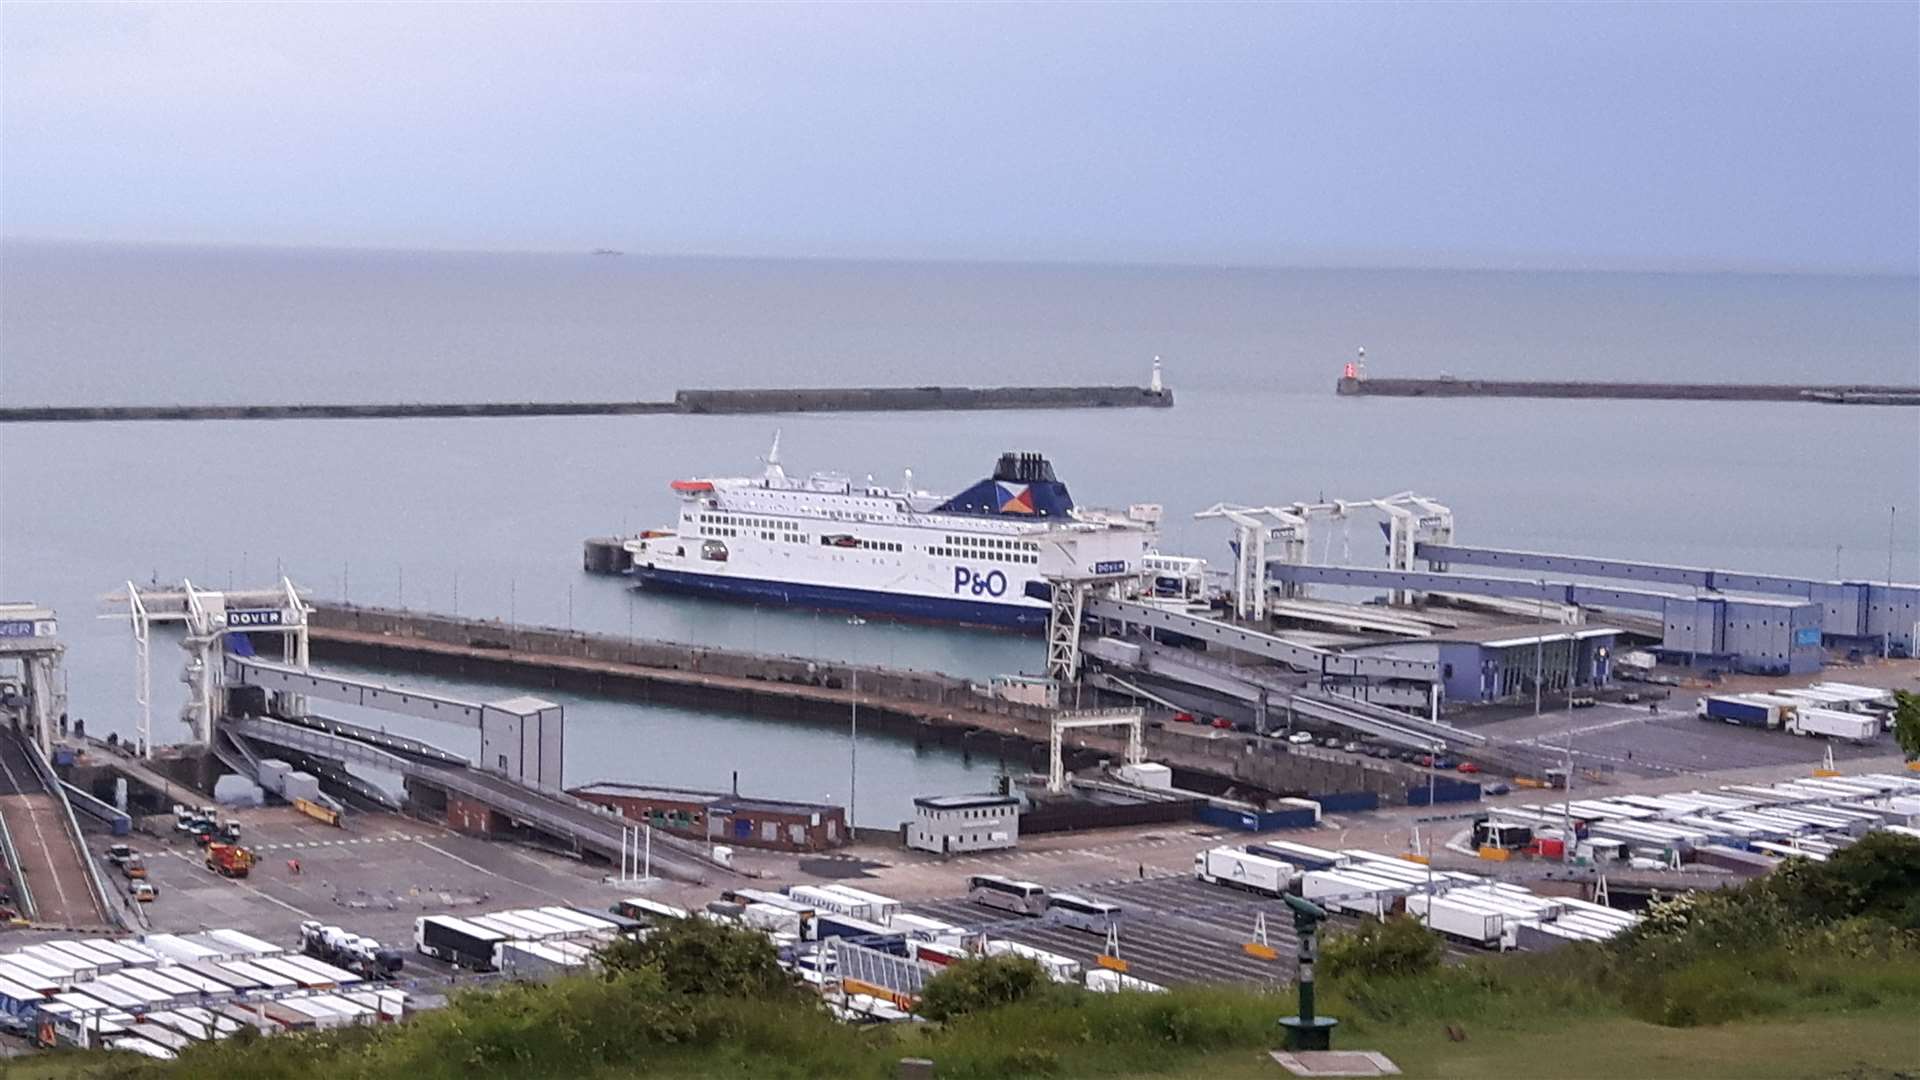 Convention suggests a ferry, or Eurotunnel, is the best way to cross the Channel...but why take the easy path?